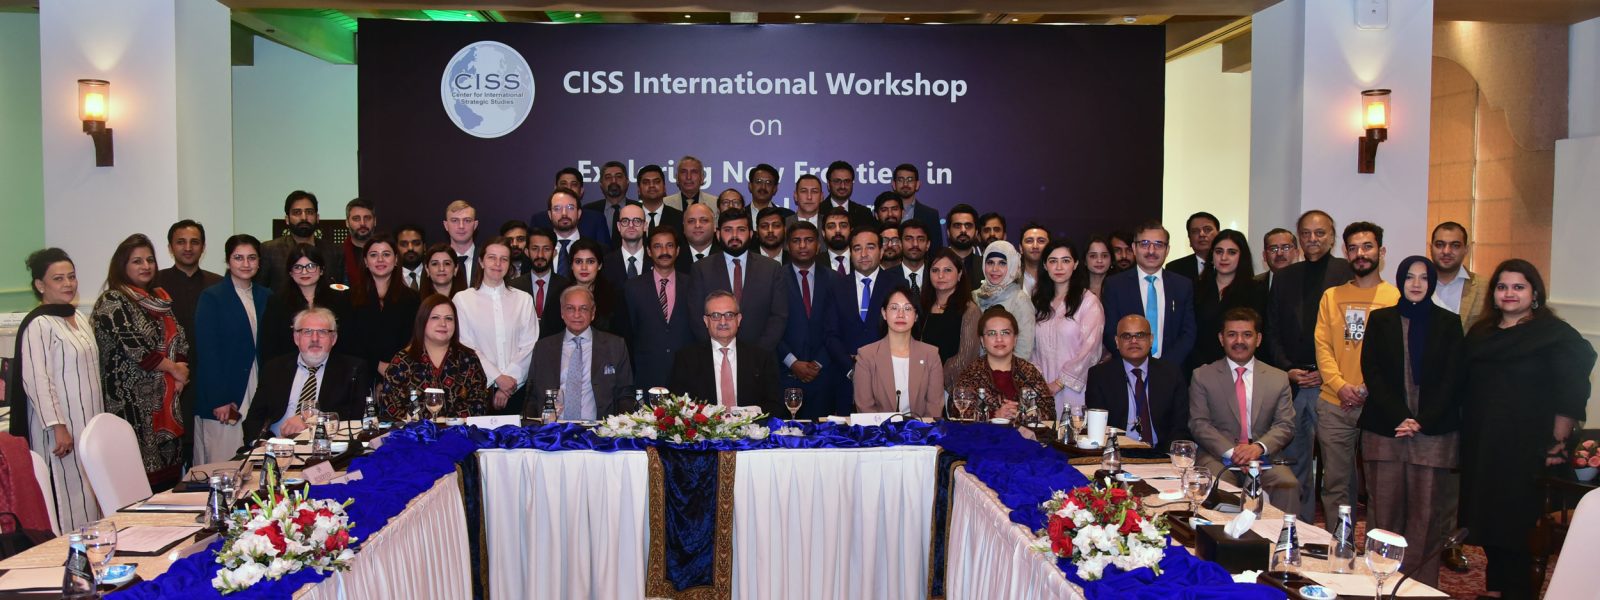 CISS International Workshop on Exploring New Frontiers in International Security: Cyber, AI, and Autonomy